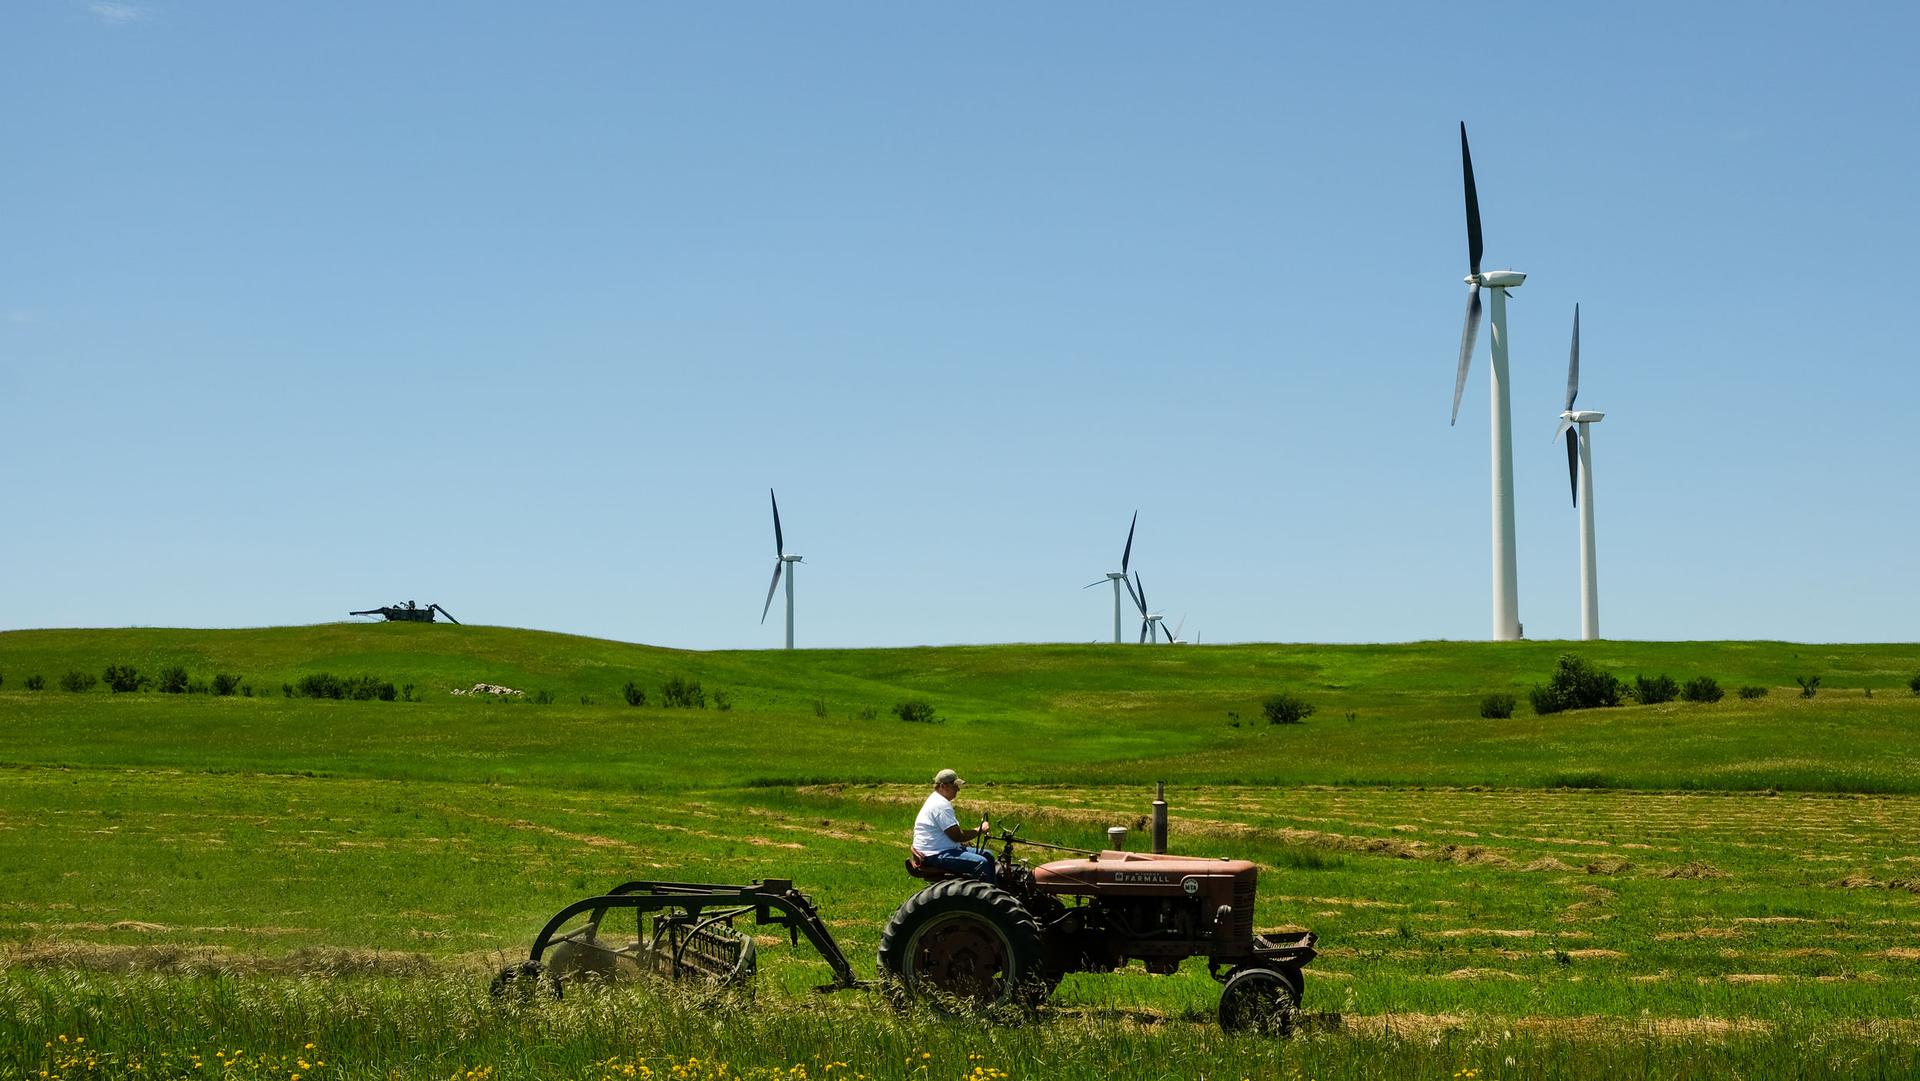 A farm tractor is shown in a large green field with wind turbines in the background.